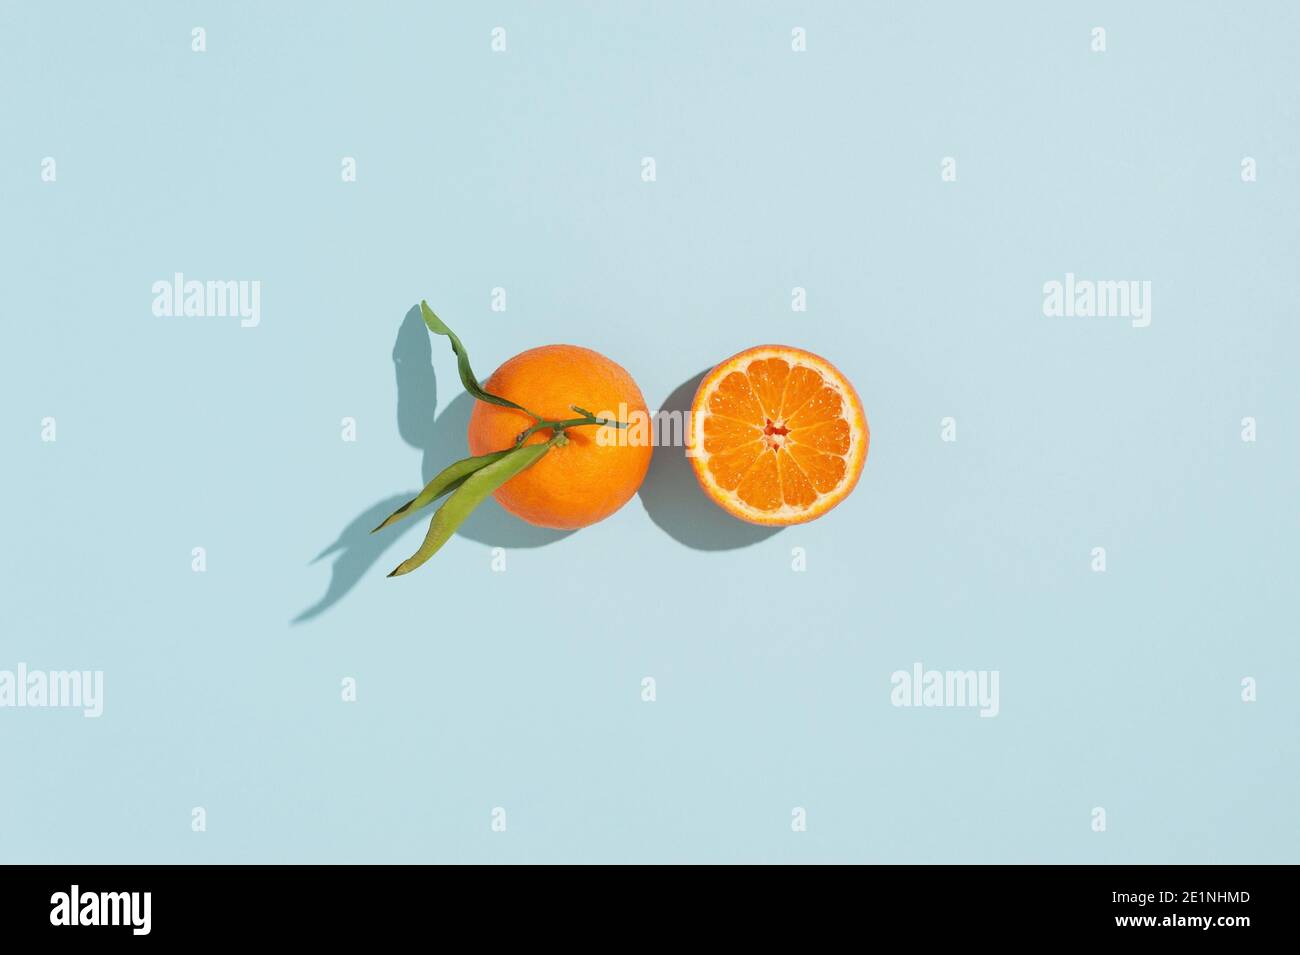 Creative background with fresh orange tangerines  over blue background. Image with hard shadows. Abstract summer or winter background. Stock Photo